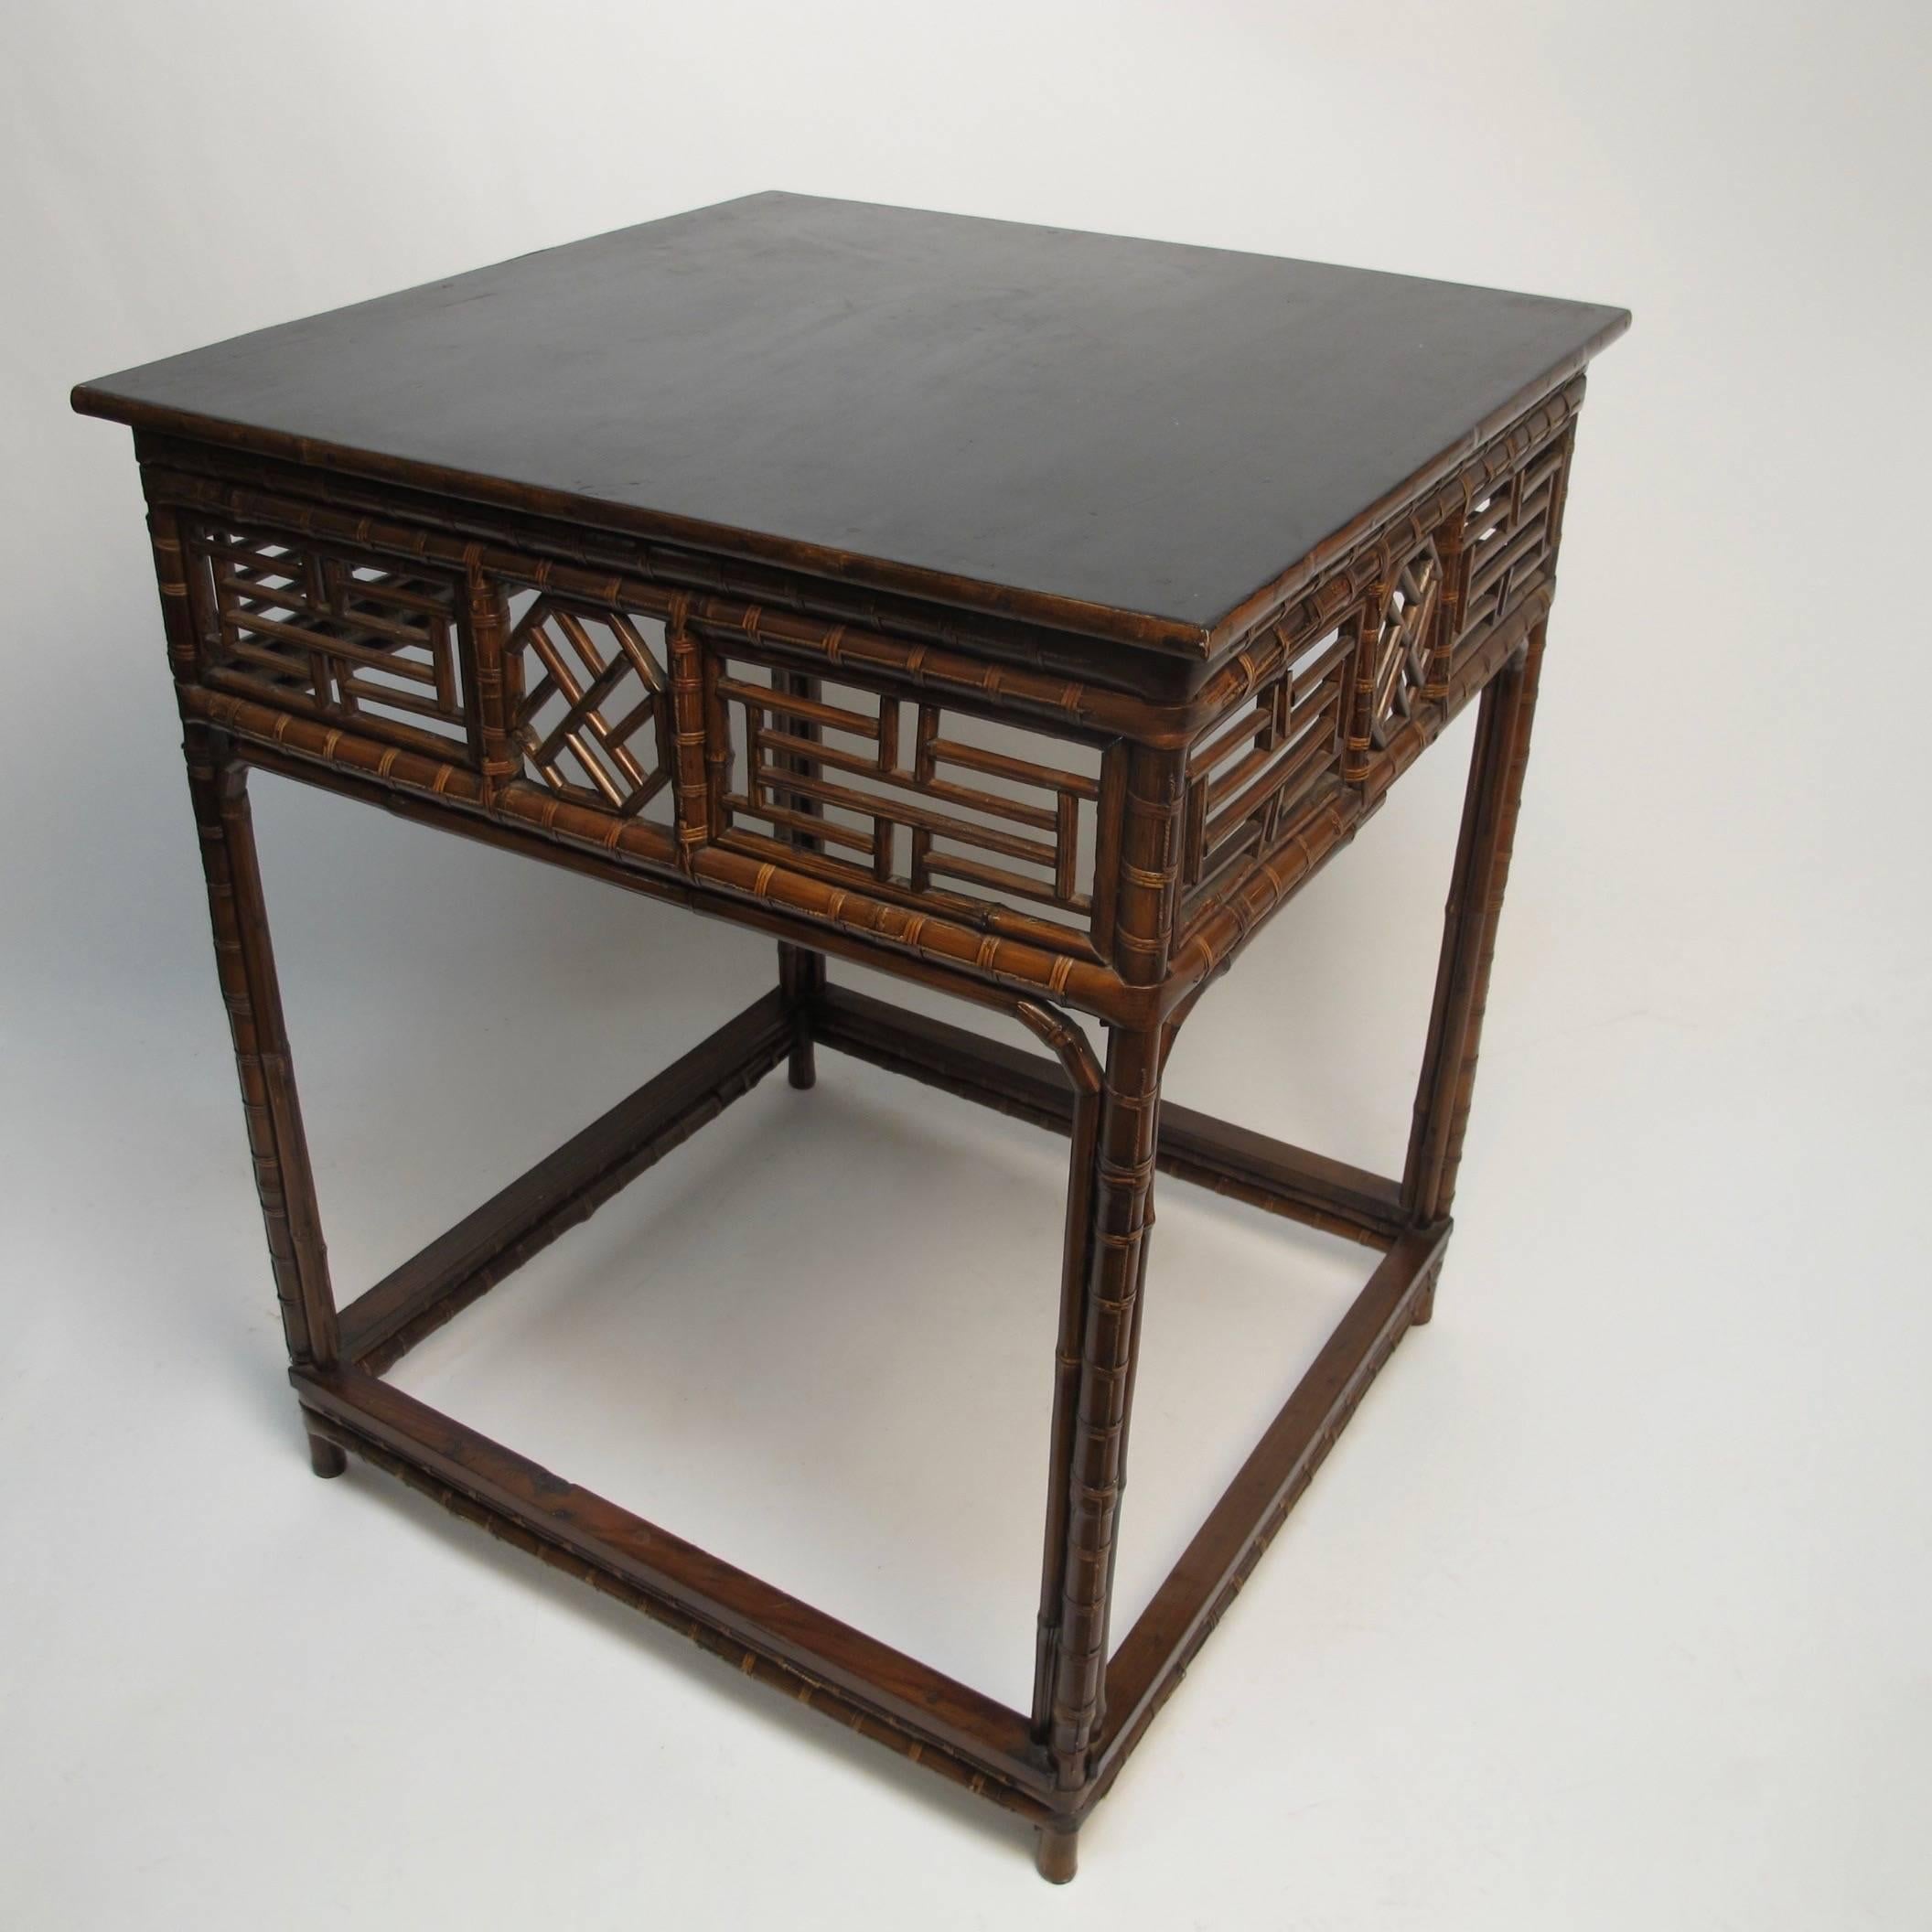 20th Century Antique Chinese Bamboo Table c1880 For Sale